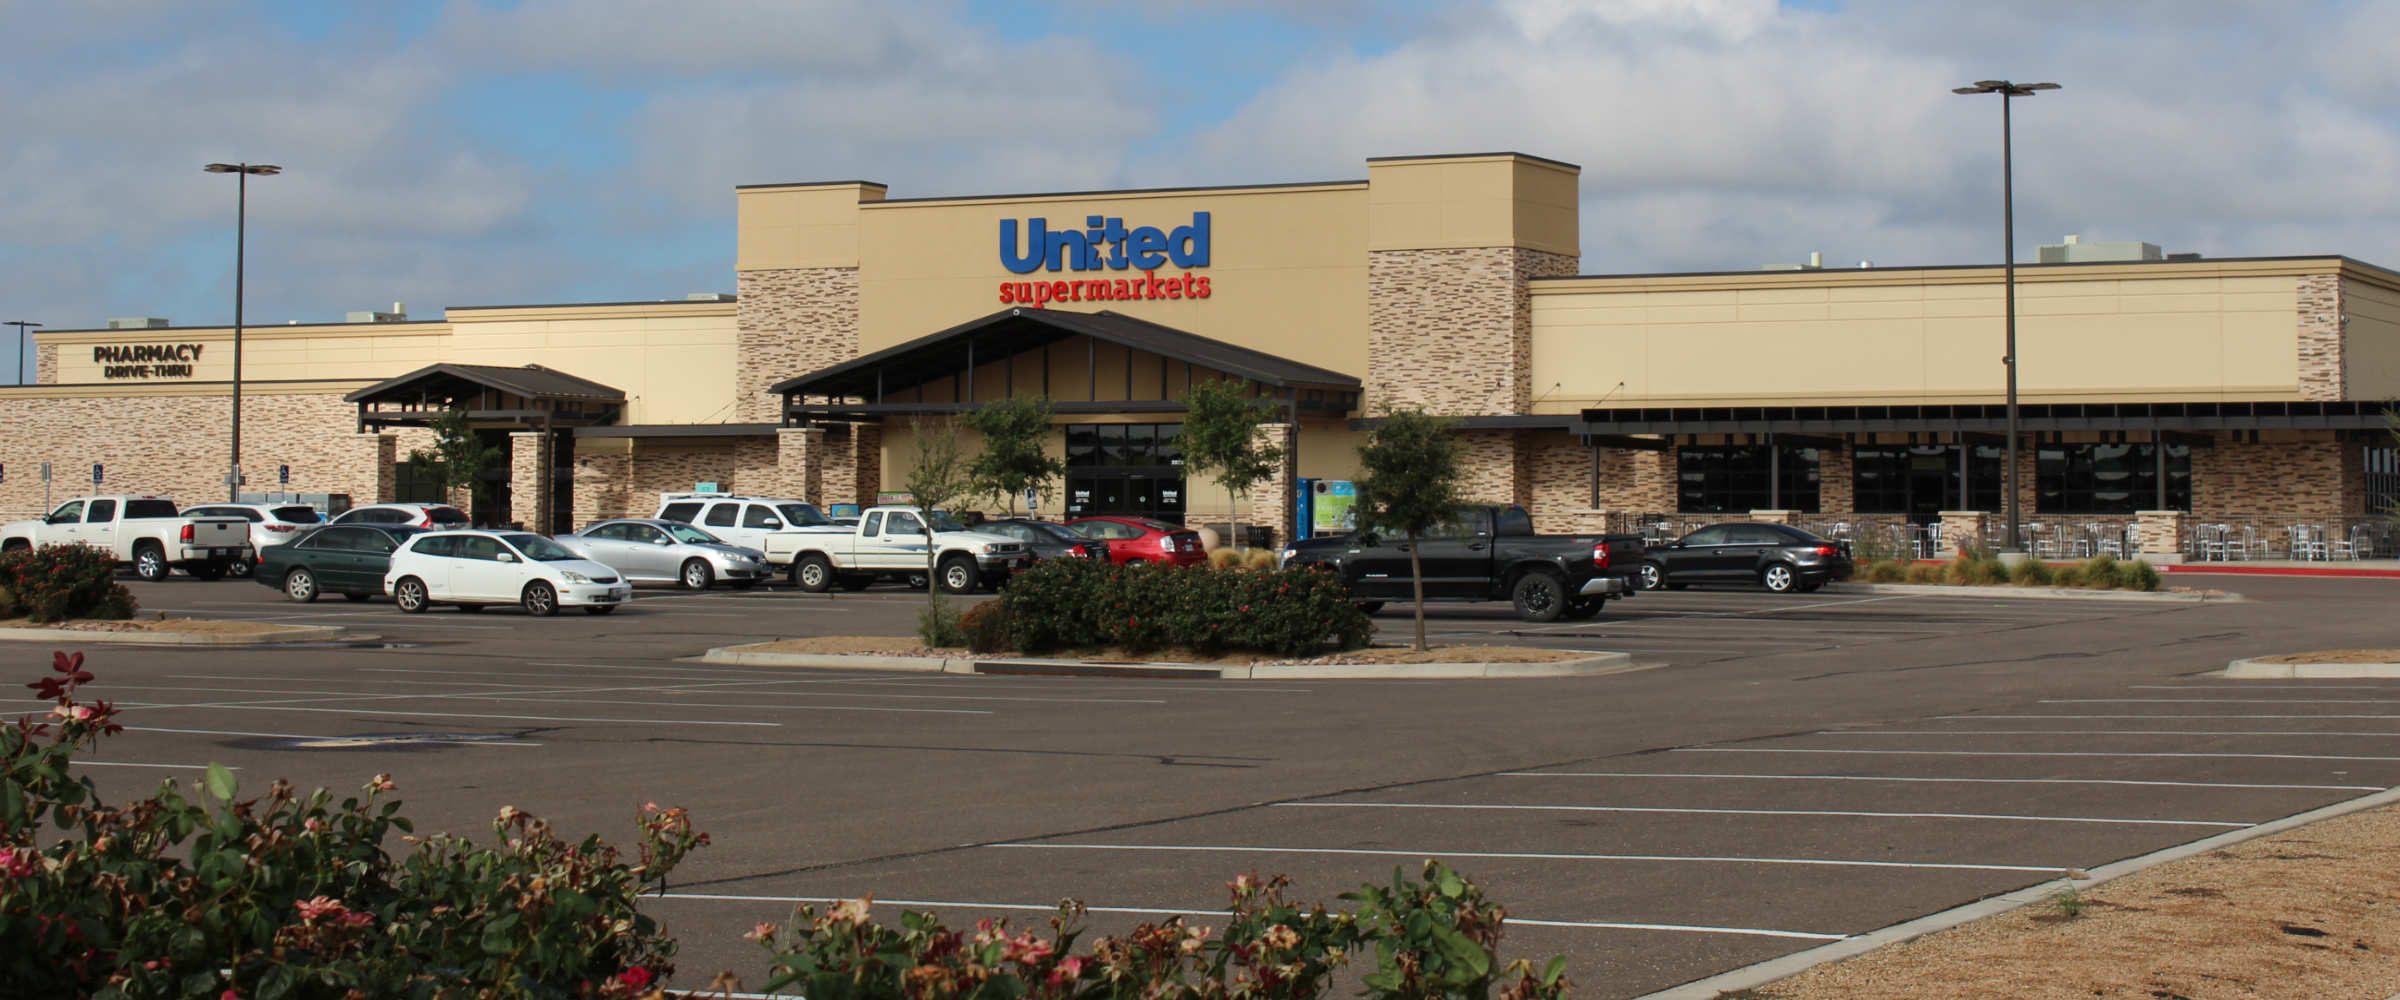 Read more about the article Does United Supermarkets Recruit Felons?